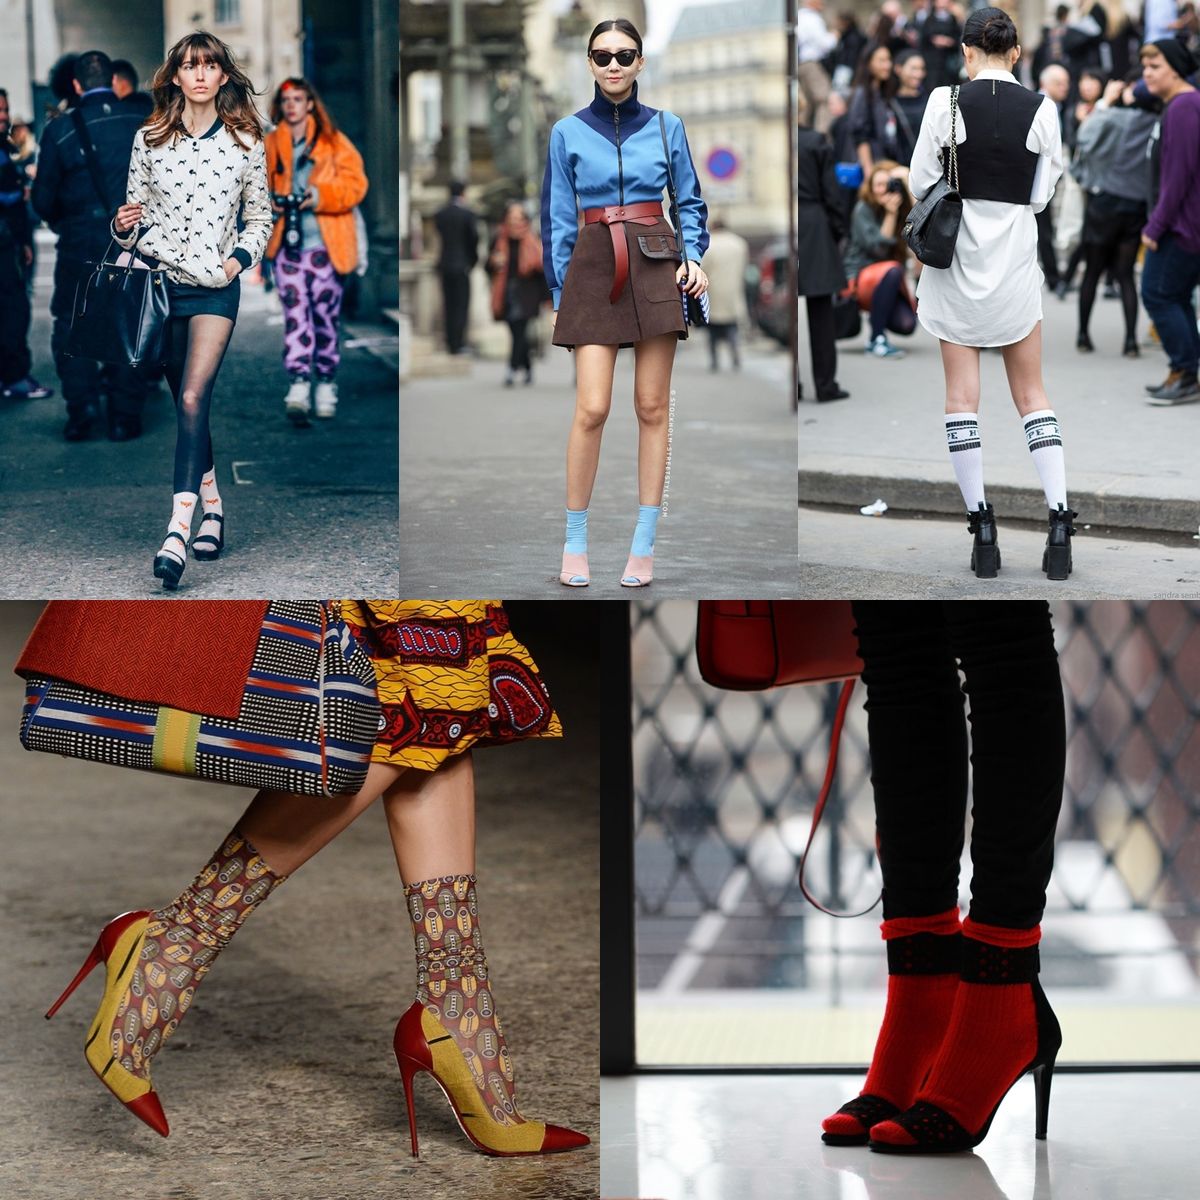 Heels & Socks.  The 80's Trend is back with a more updated look